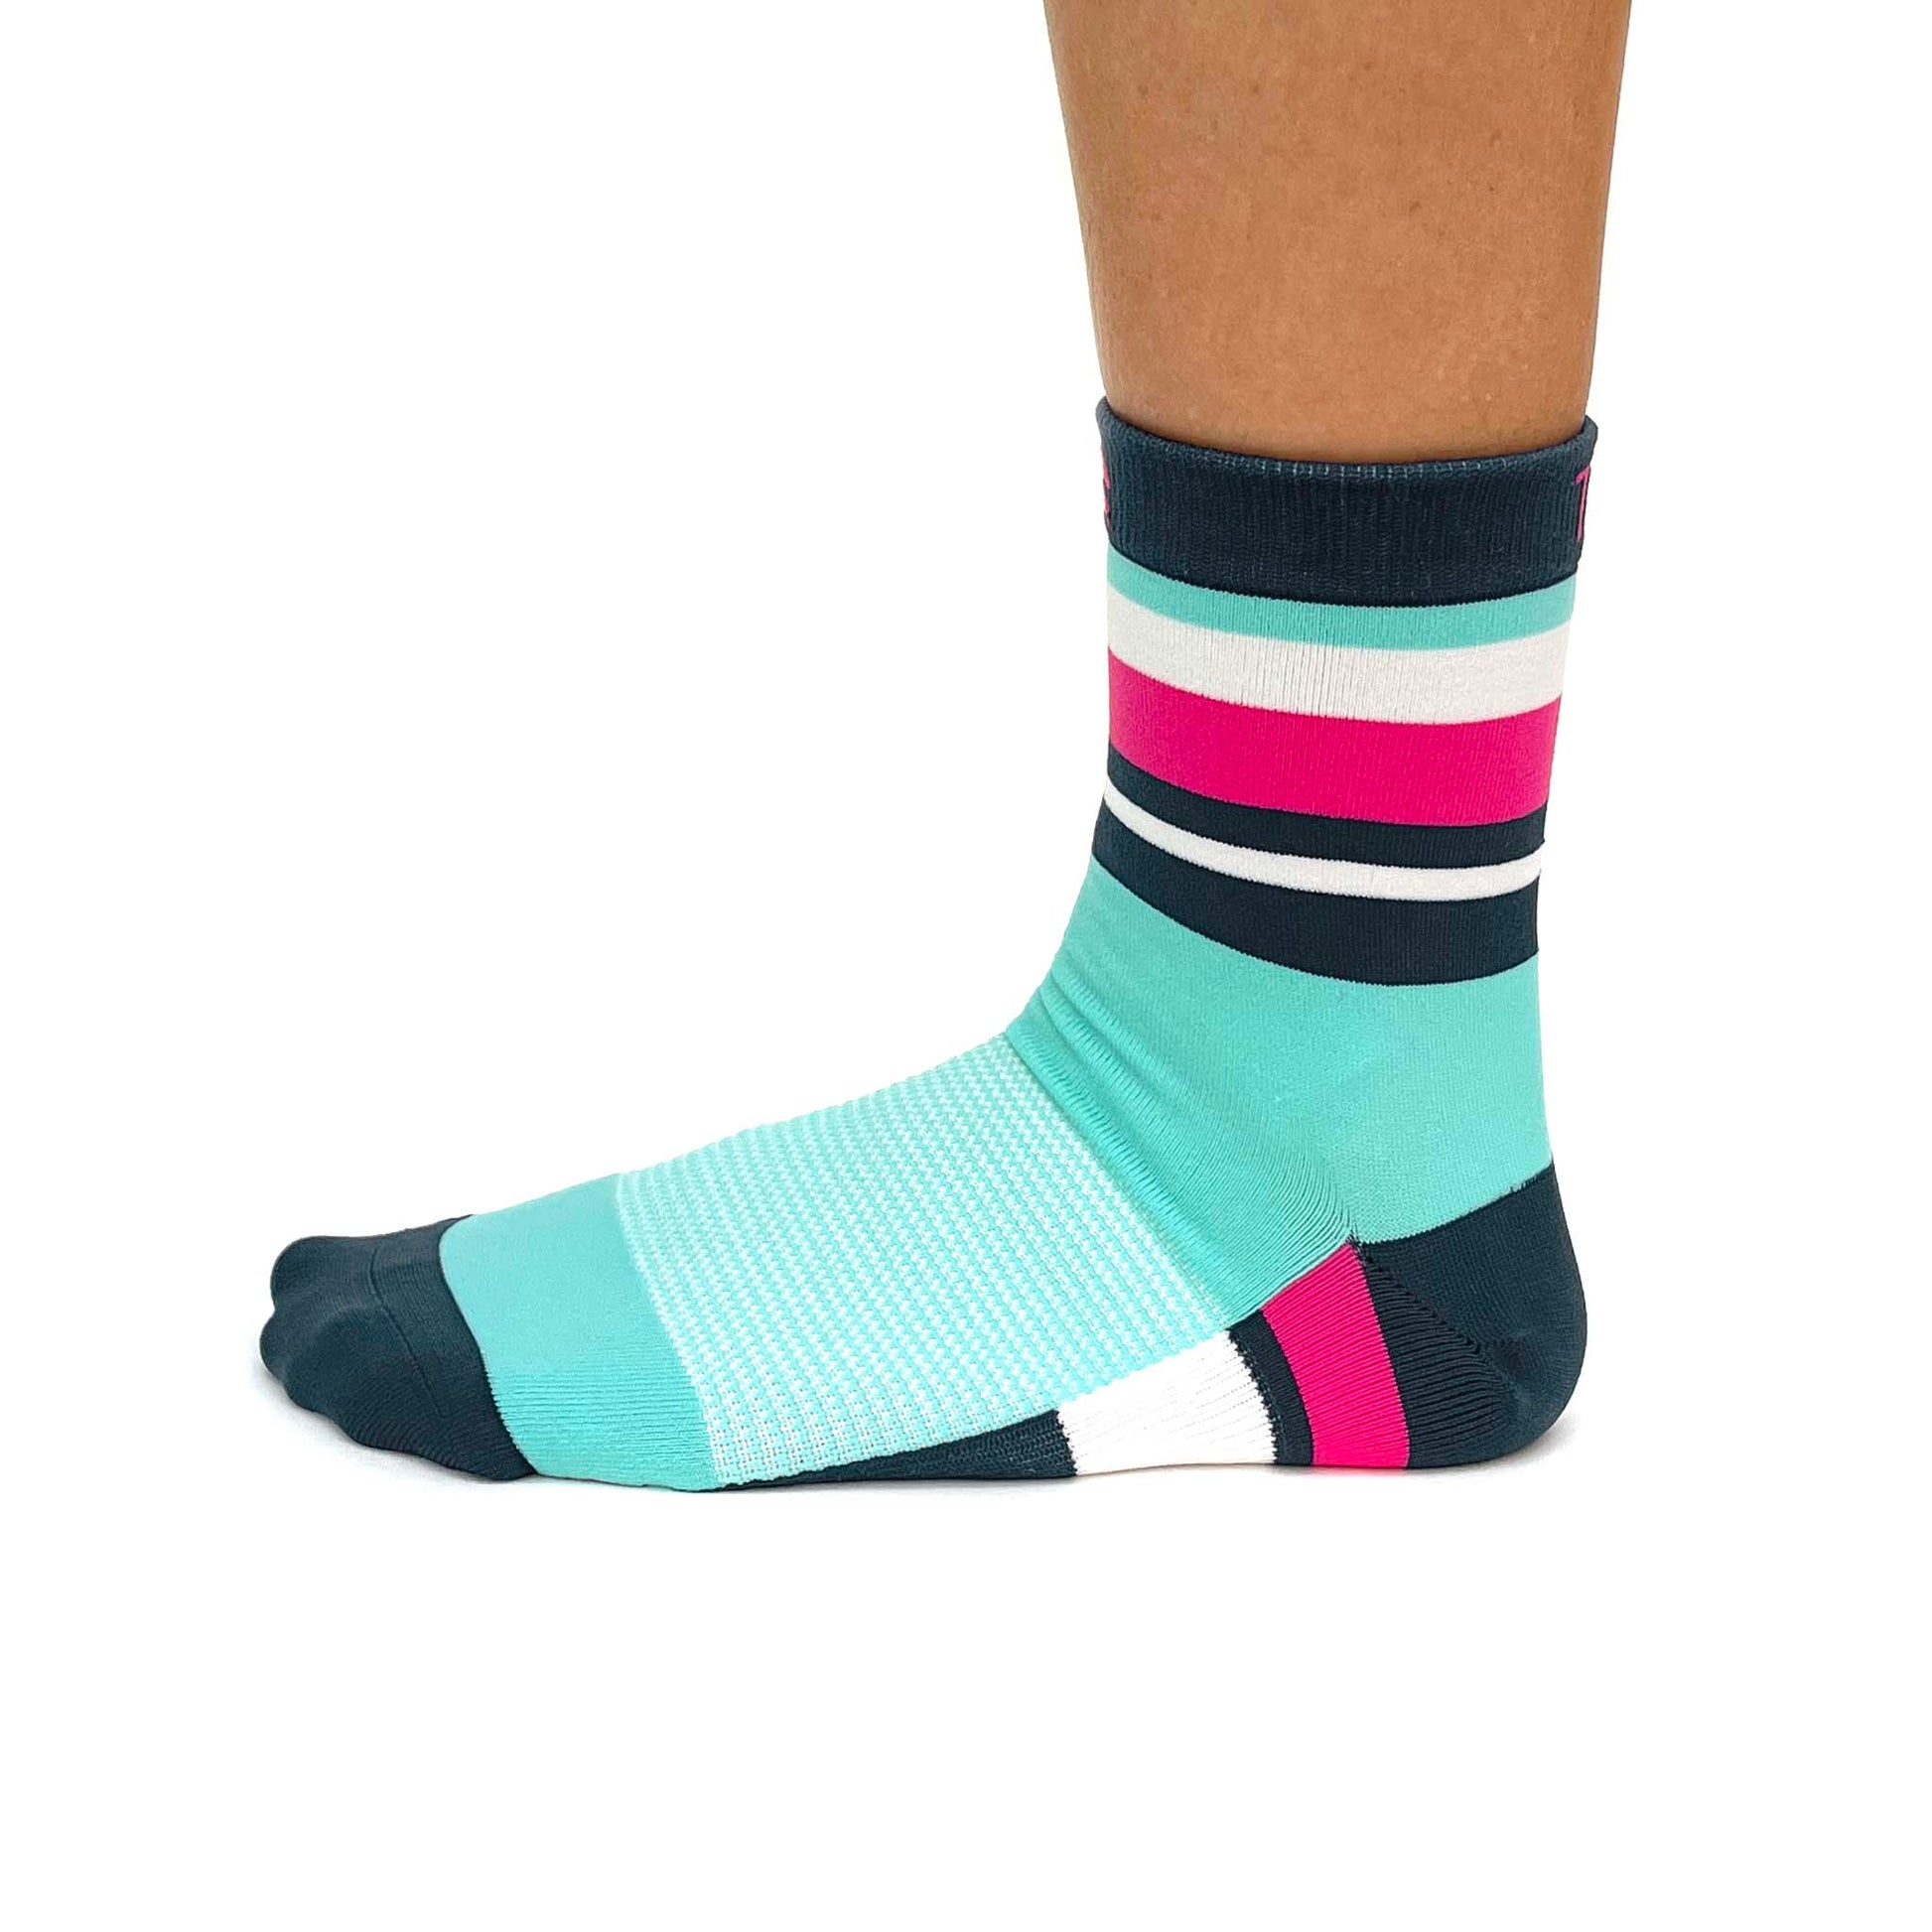 Mix Match Socks - Express Your Fun Side! – T8